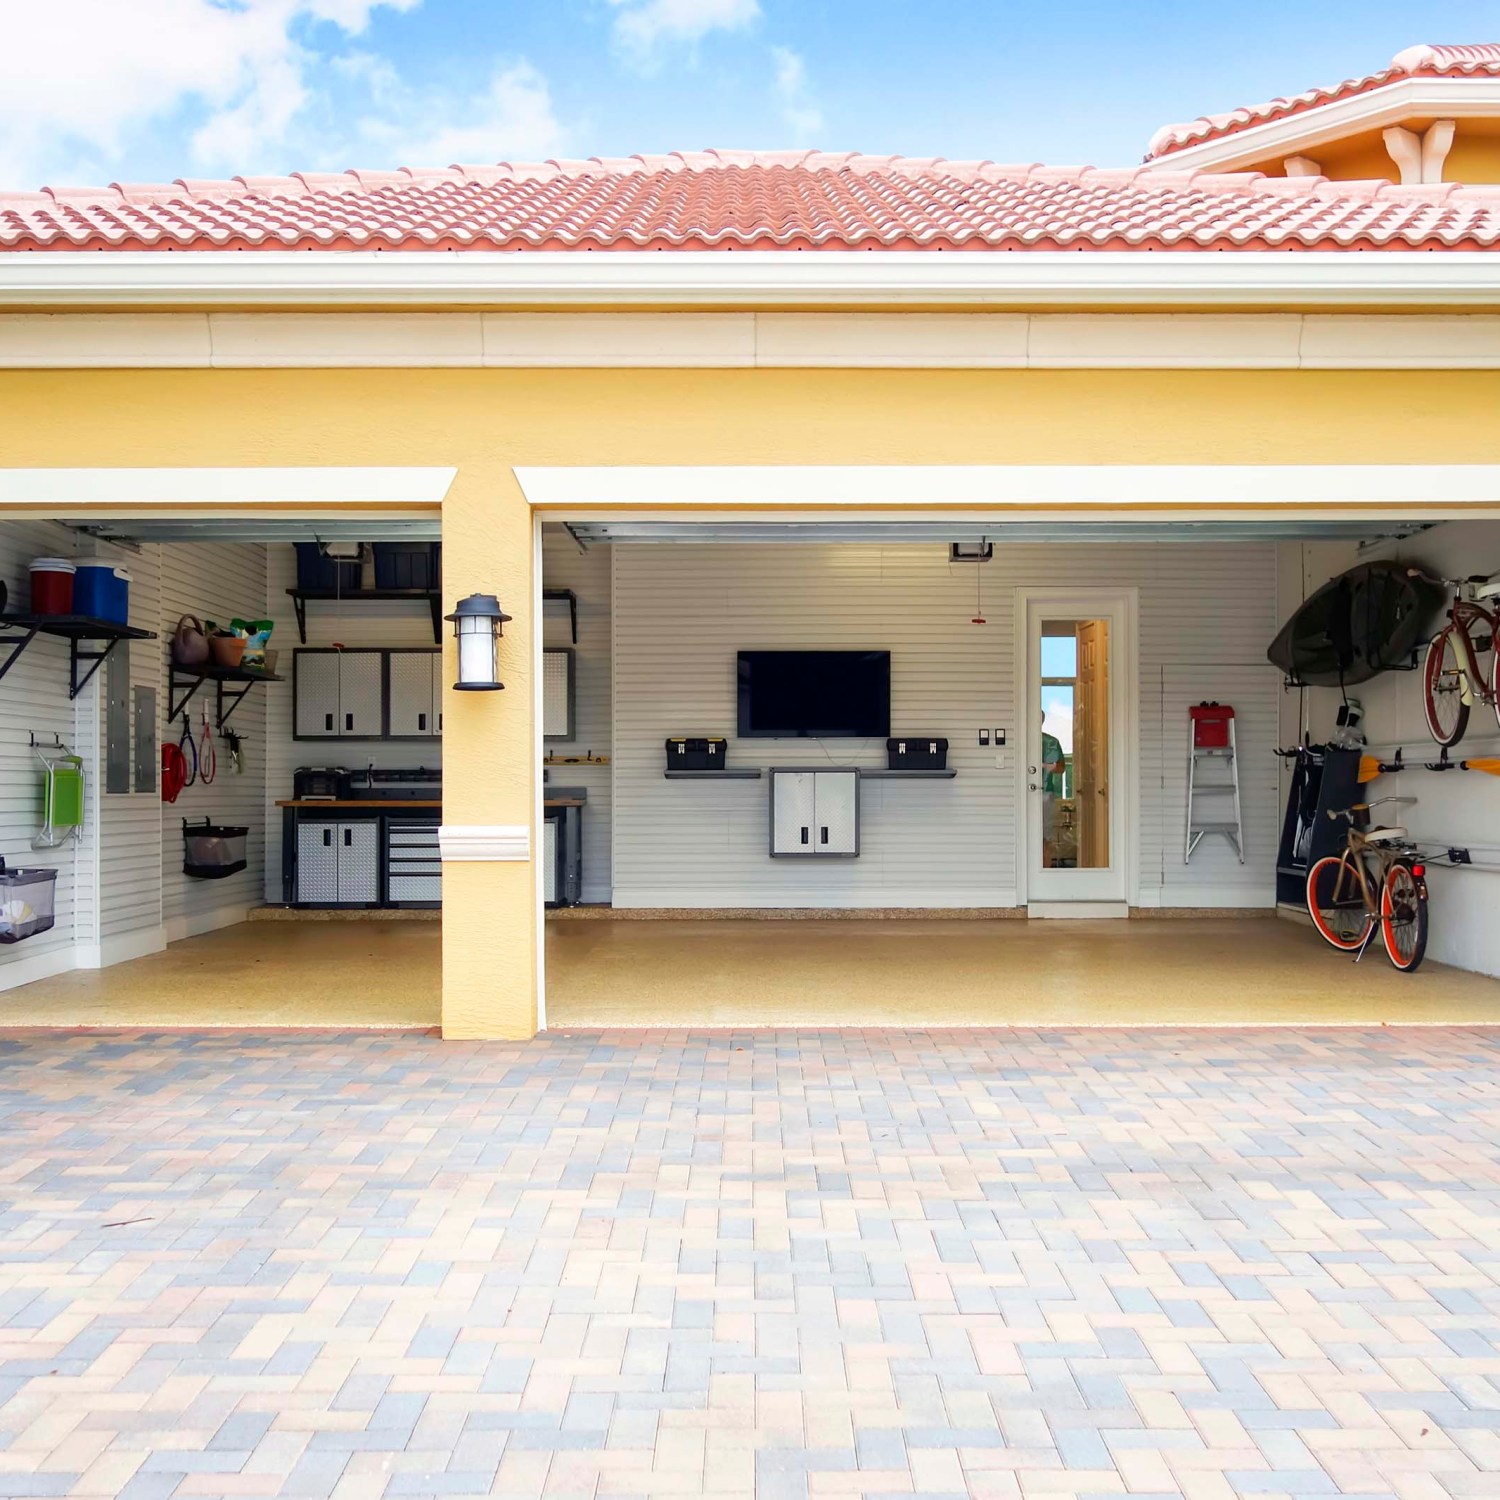 three car garage attached to a home that is well organized with shelves, bicycle racks work area and storage cabinets. There is a flat screen tv on the wall. there are no cars in the garage.